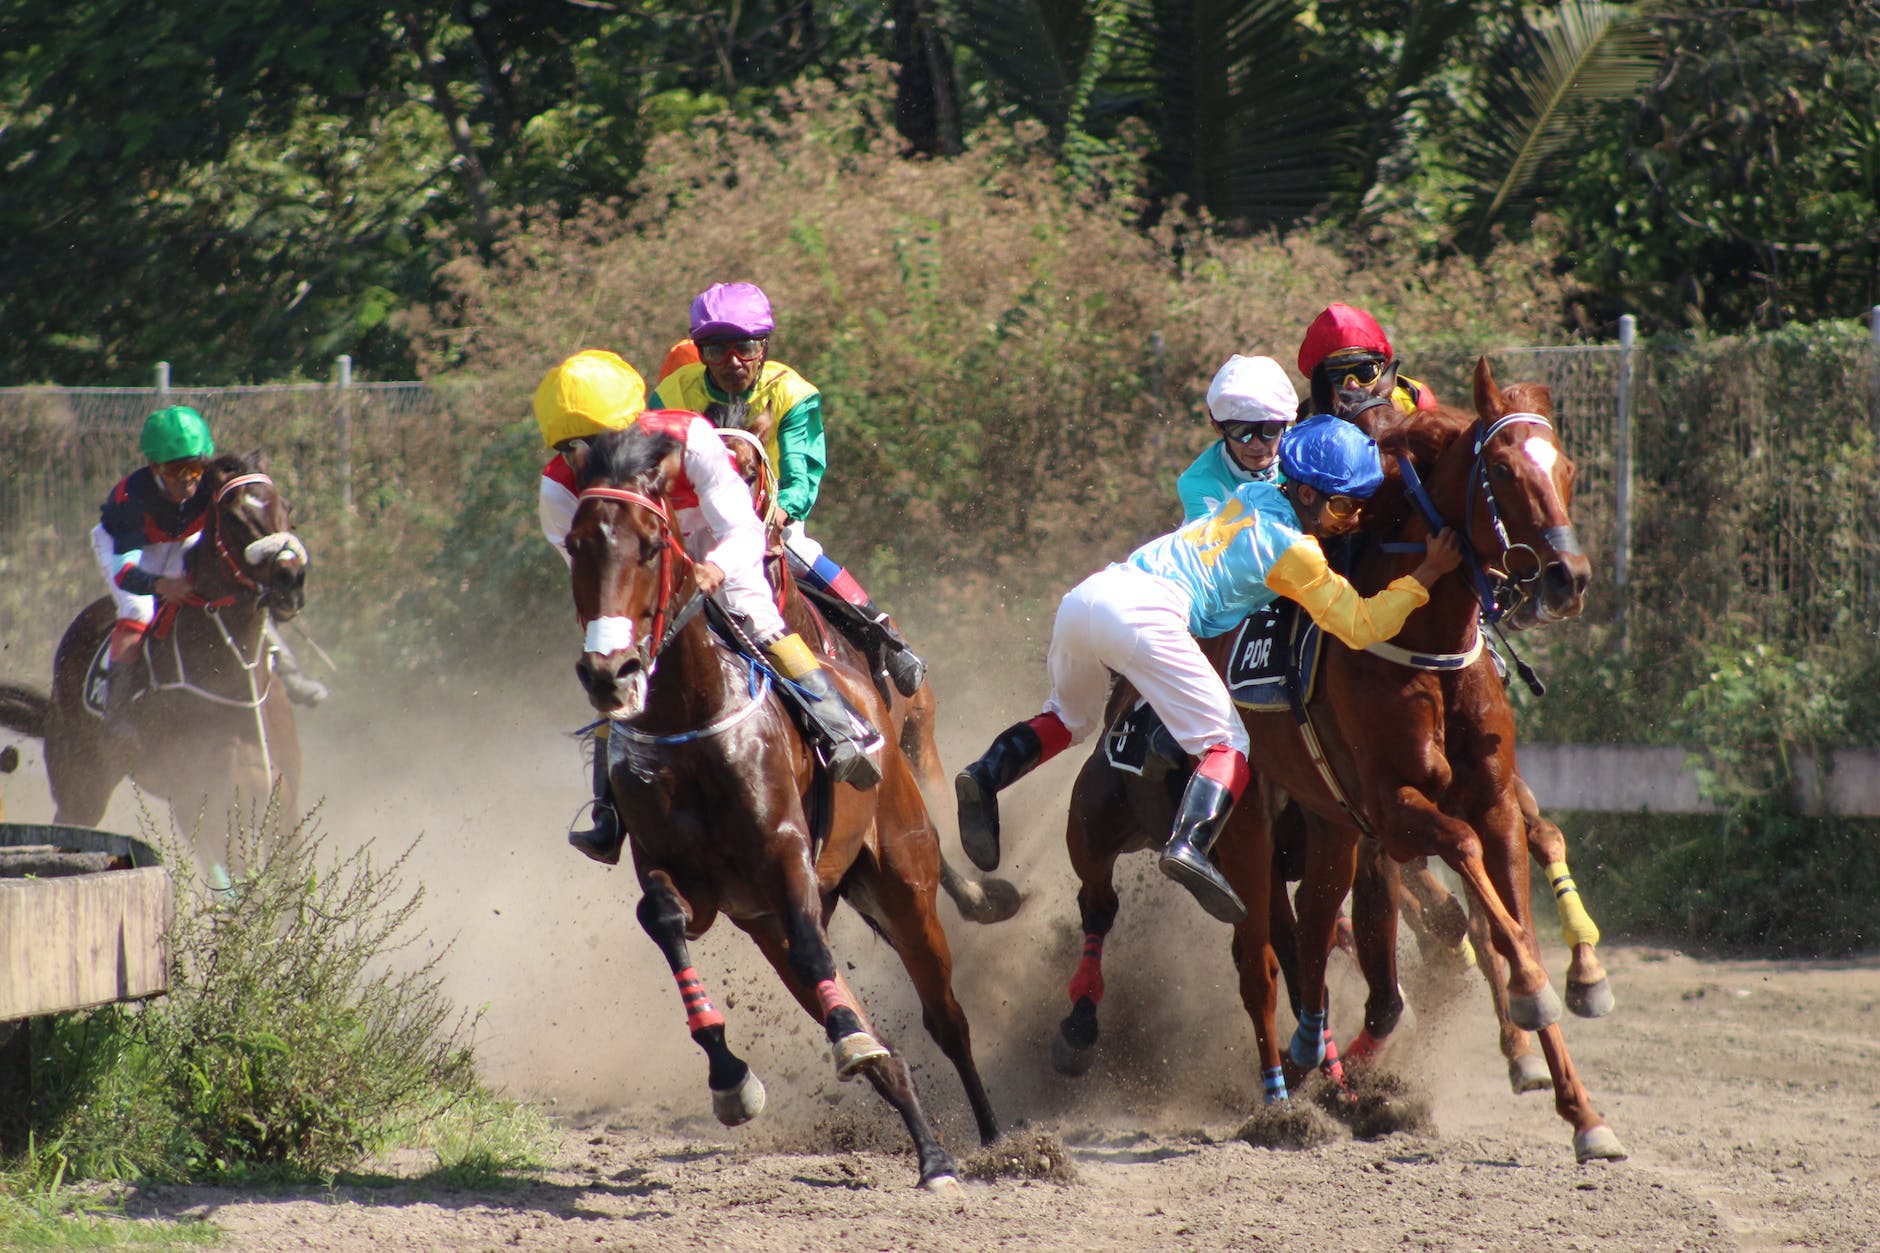 horse riders during competition in paddock